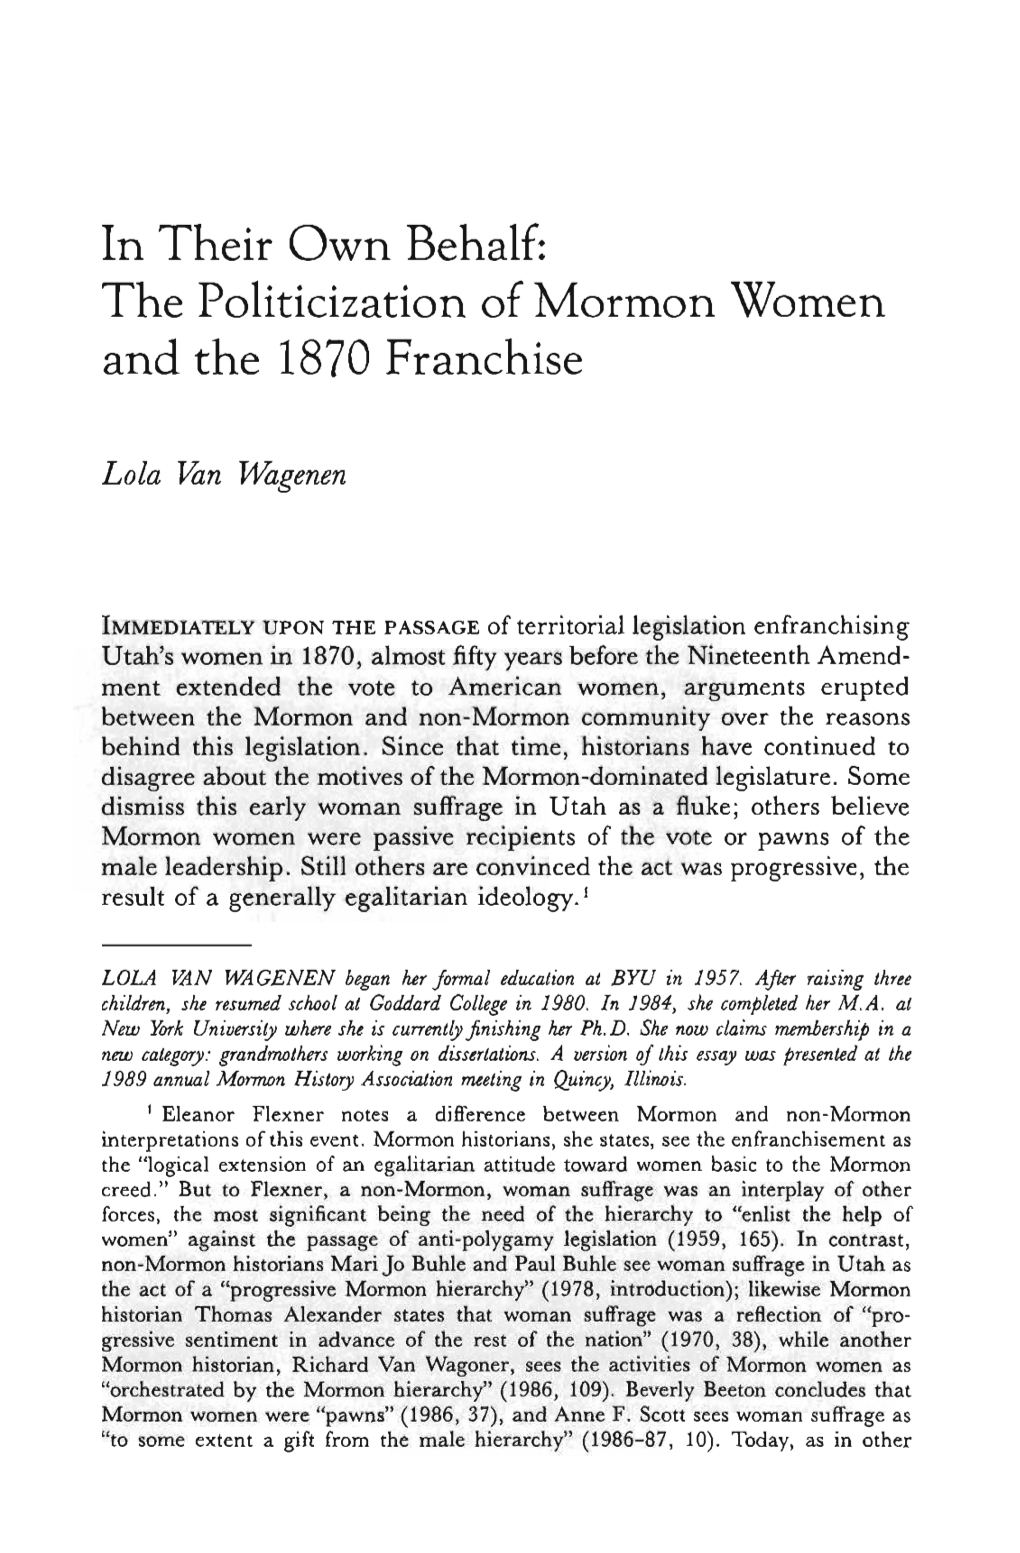 In Their Own Behalf: the Politicization of Mormon Women and the 1870 Franchise